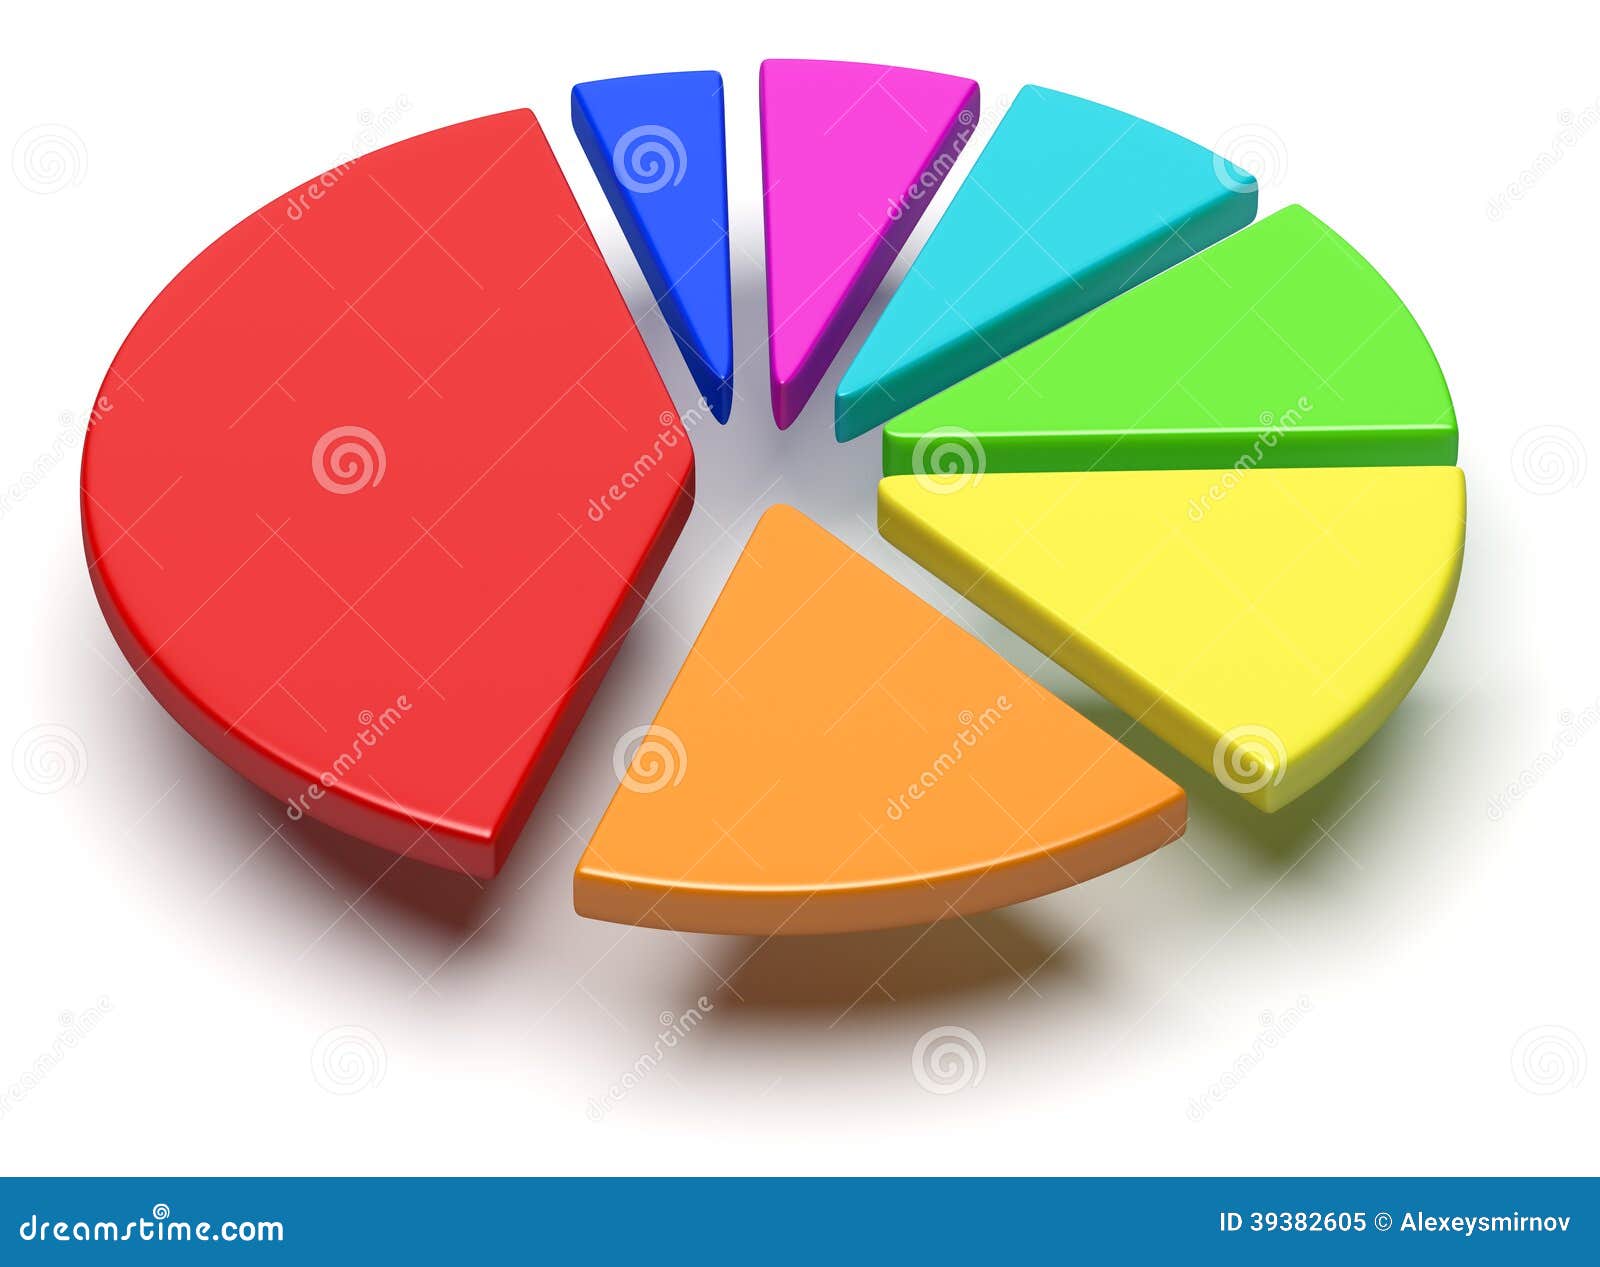 Colorful Pie Chart with Flying Separated Segments Stock